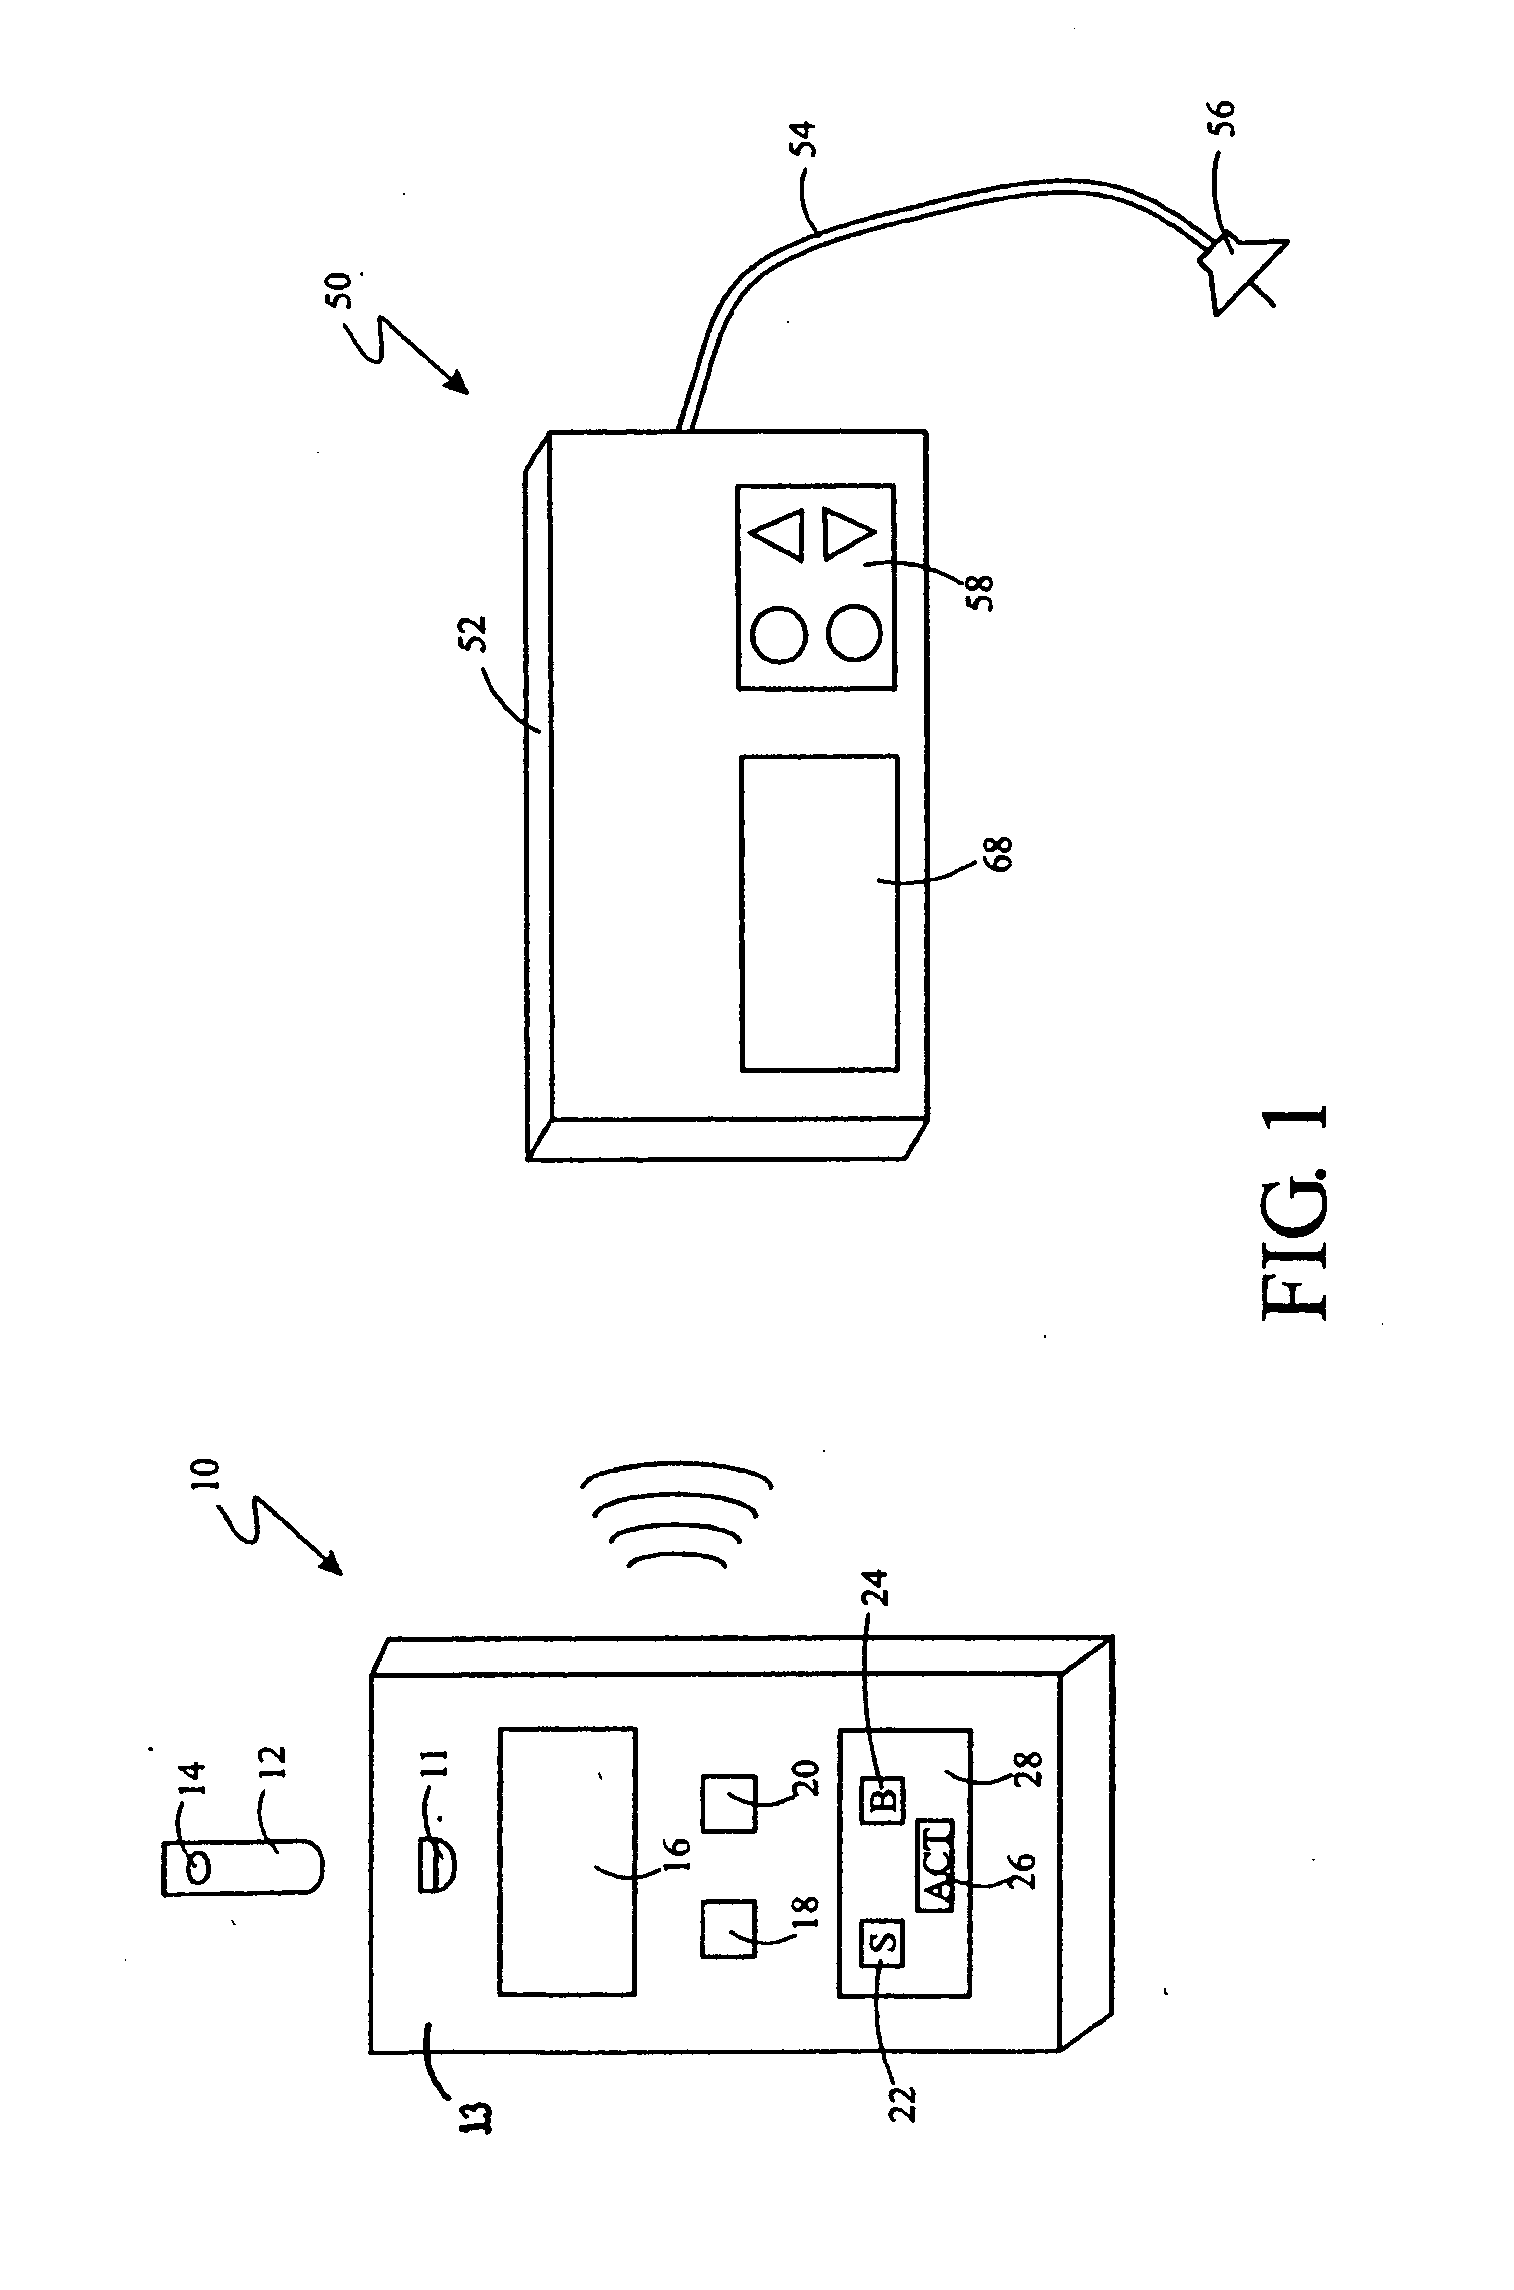 System for providing blood glucose measurements to an infusion device